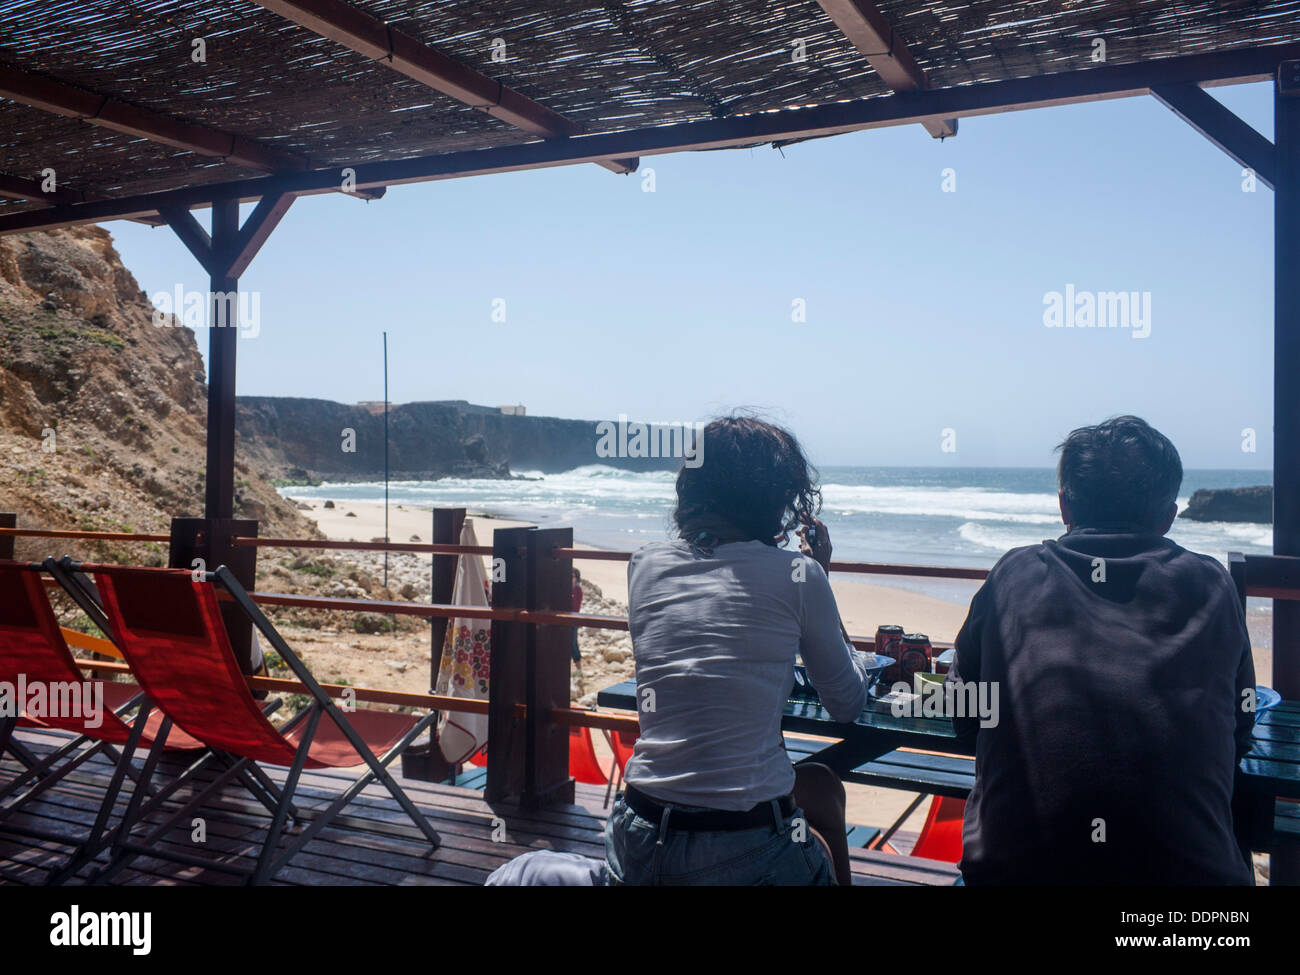 Two women sitting in cafe beach shack looking out to beach and sea ocean Praia do Tonel Sagres Costa Vicentina Algarve Portugal Stock Photo